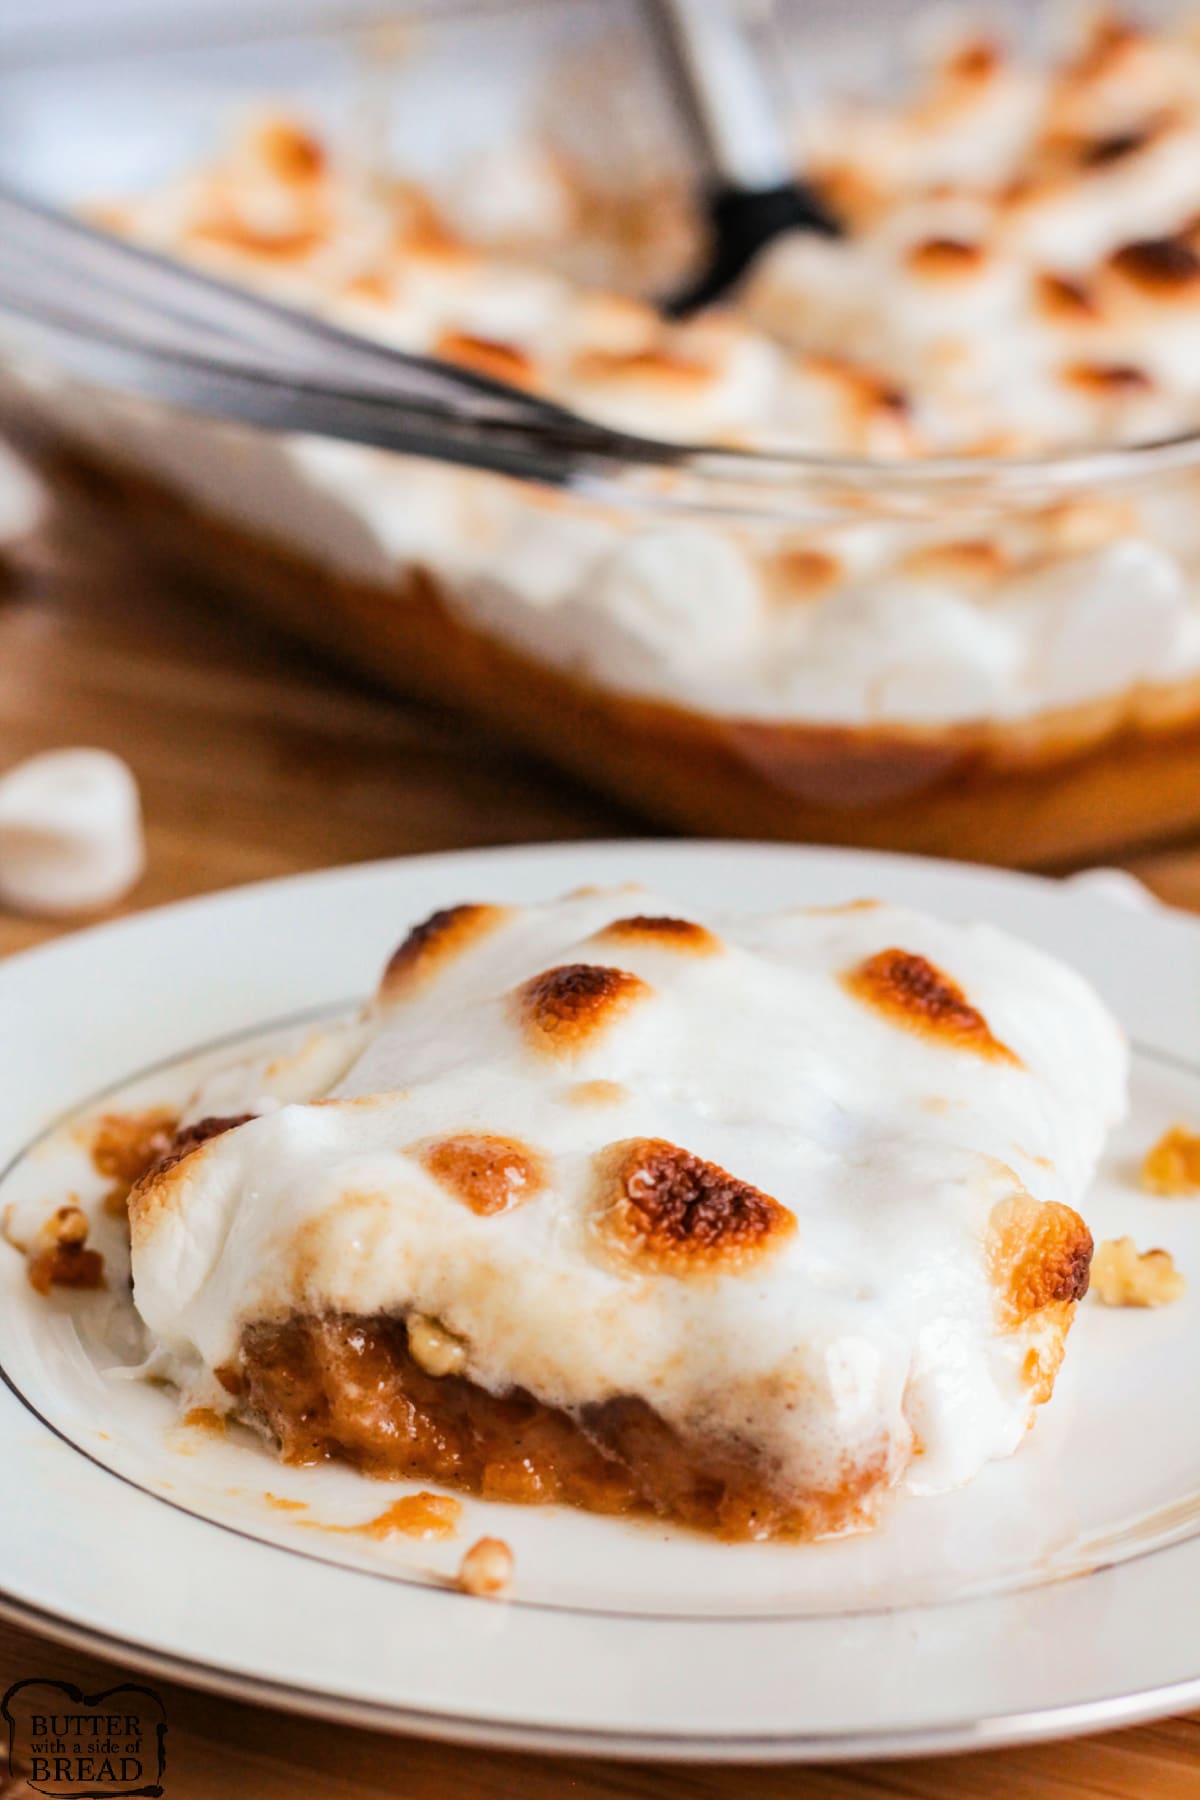 This classic Sweet Potato Casserole is the best version we've ever tried! Made with canned yams and marshmallows on top, this baked casserole is perfect for Thanksgiving dinner. 